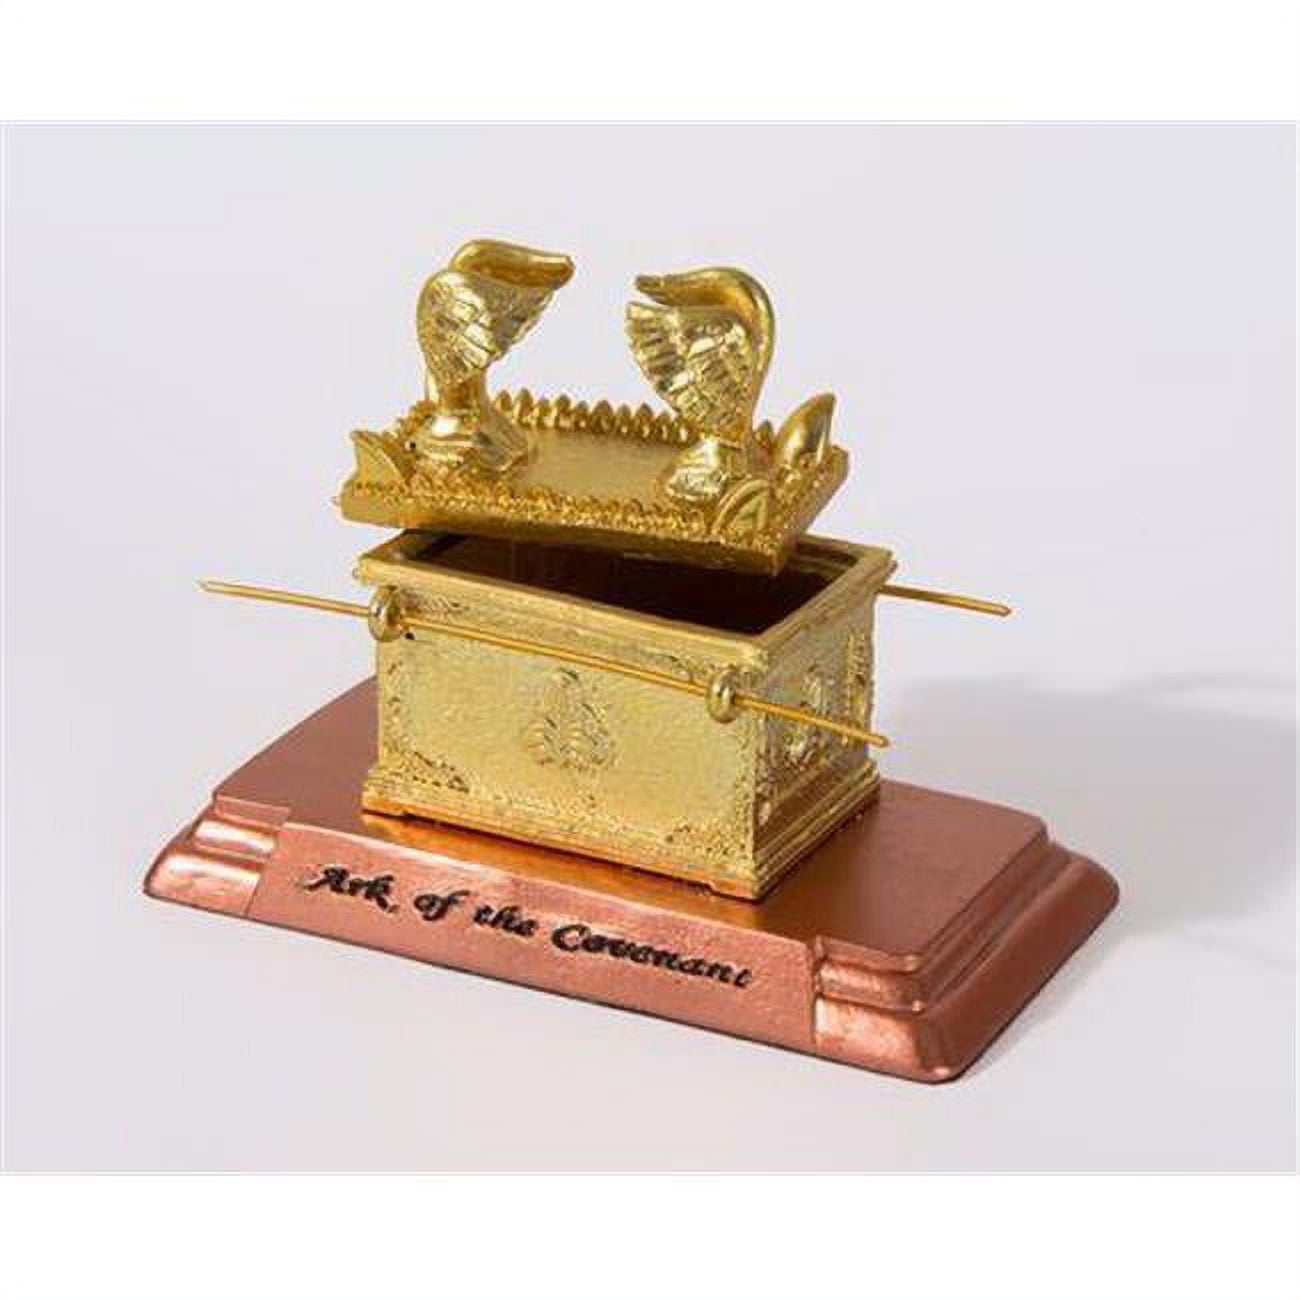 Holy Land Gifts 154031 No. 7523 Ark of The Covenant with Sacred Elements Desktop Set - Small